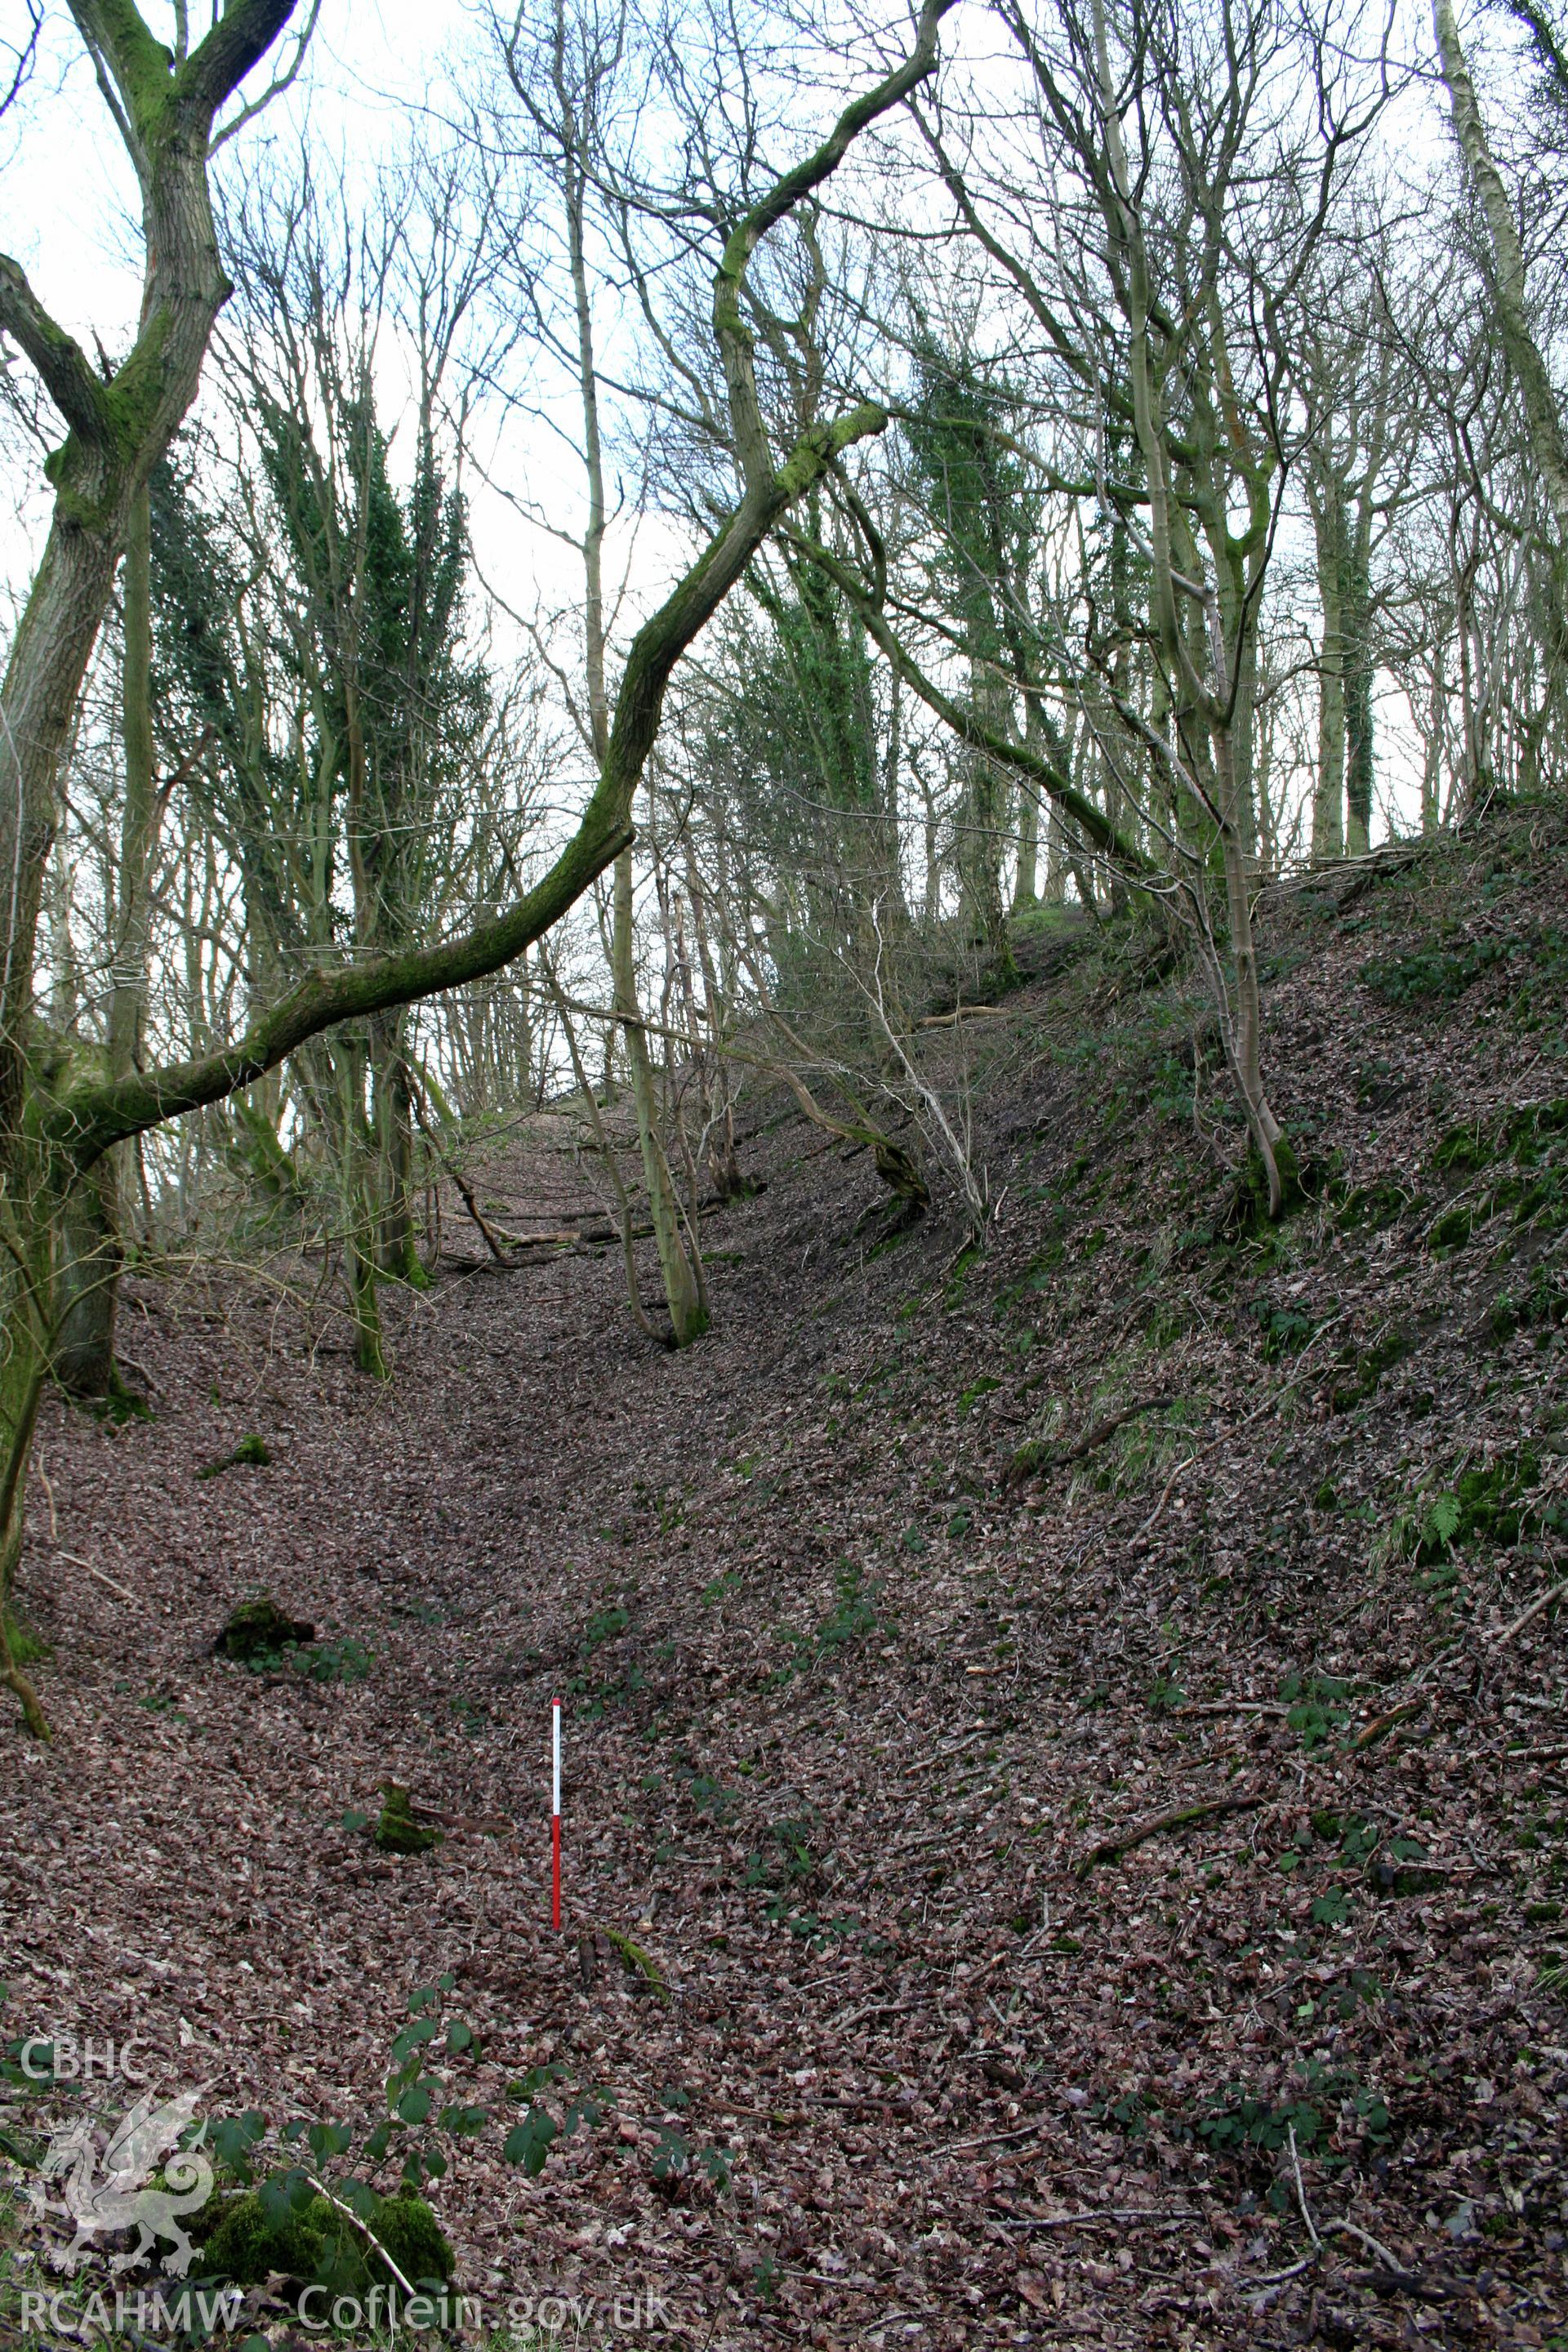 Gaer Fawr Hillfort. Looking north along the ditch of the western ramparts (with scale).